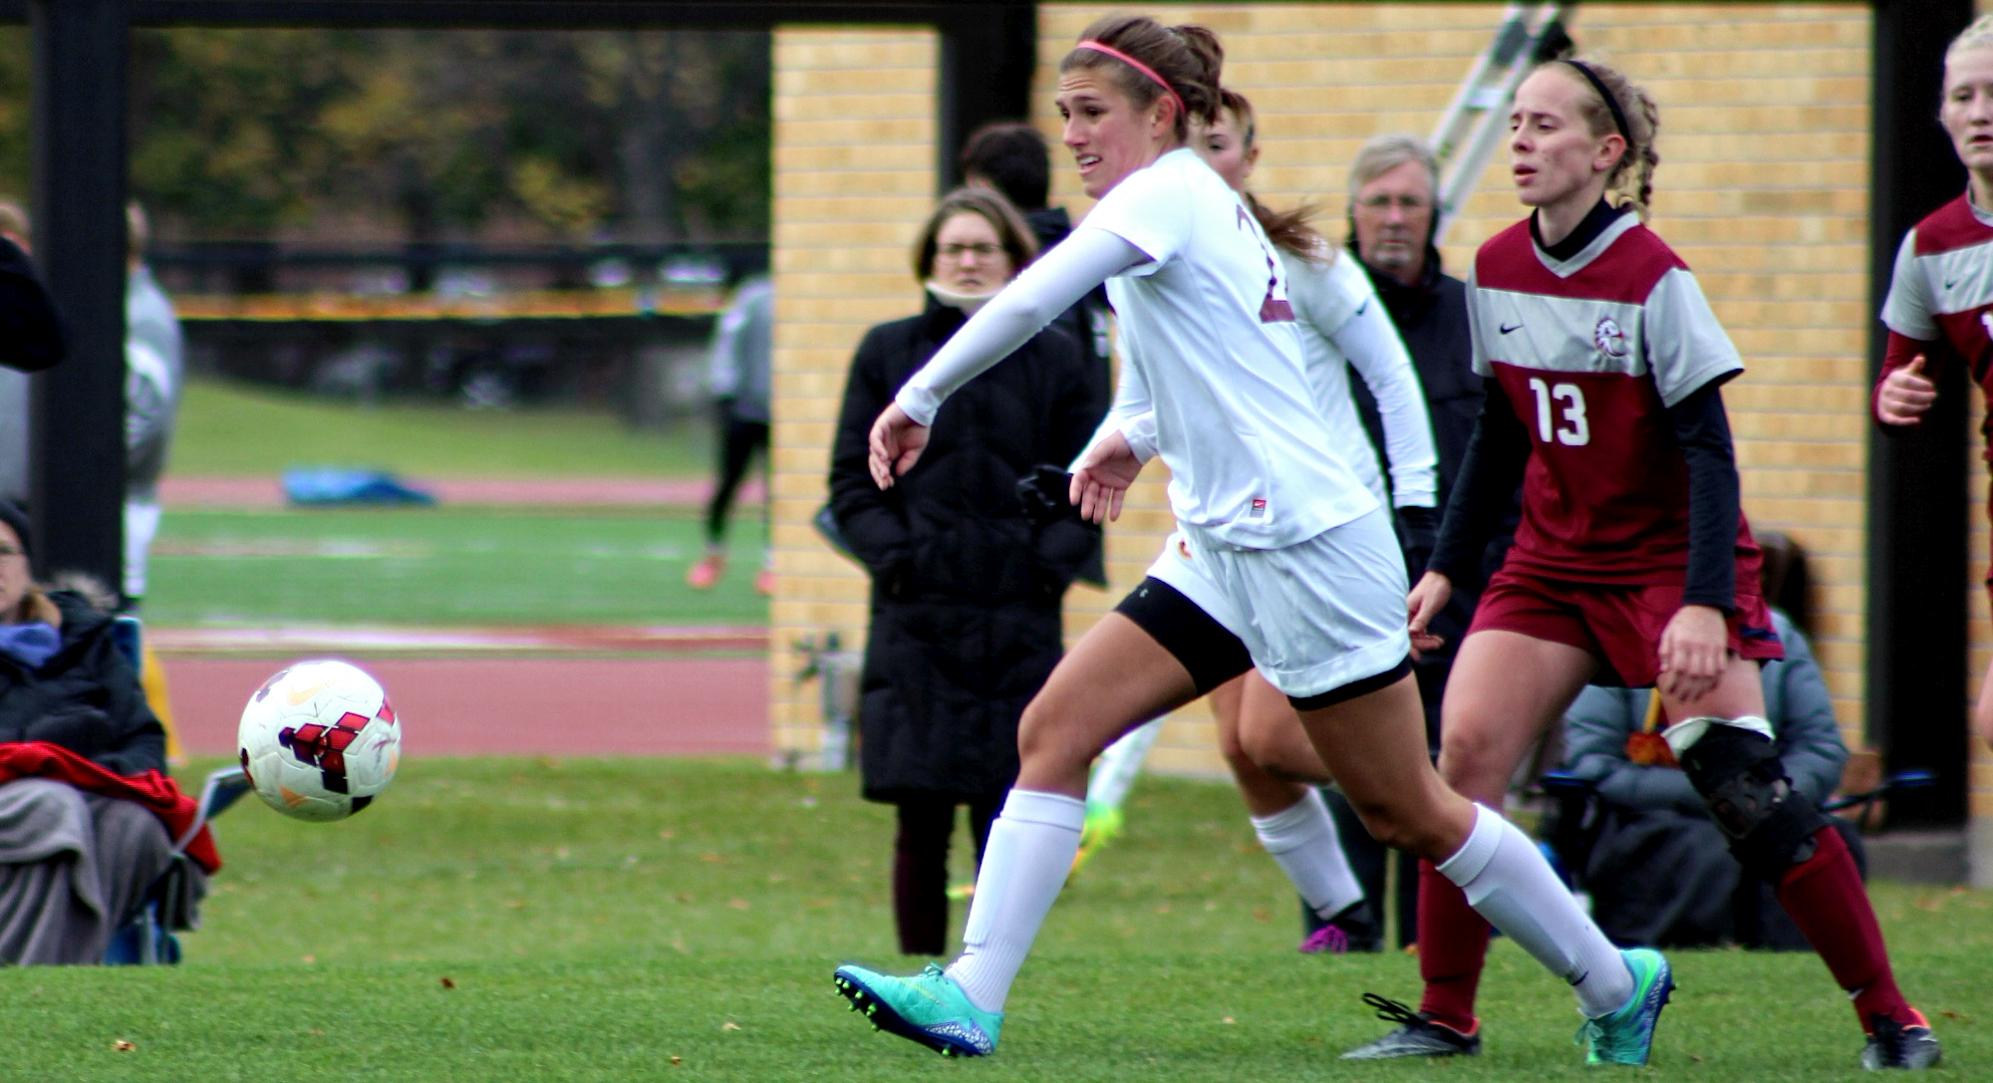 Junior midfielder Alexandra Jones plays the ball forward during the second half of the Cobbers' game with Augsburg.